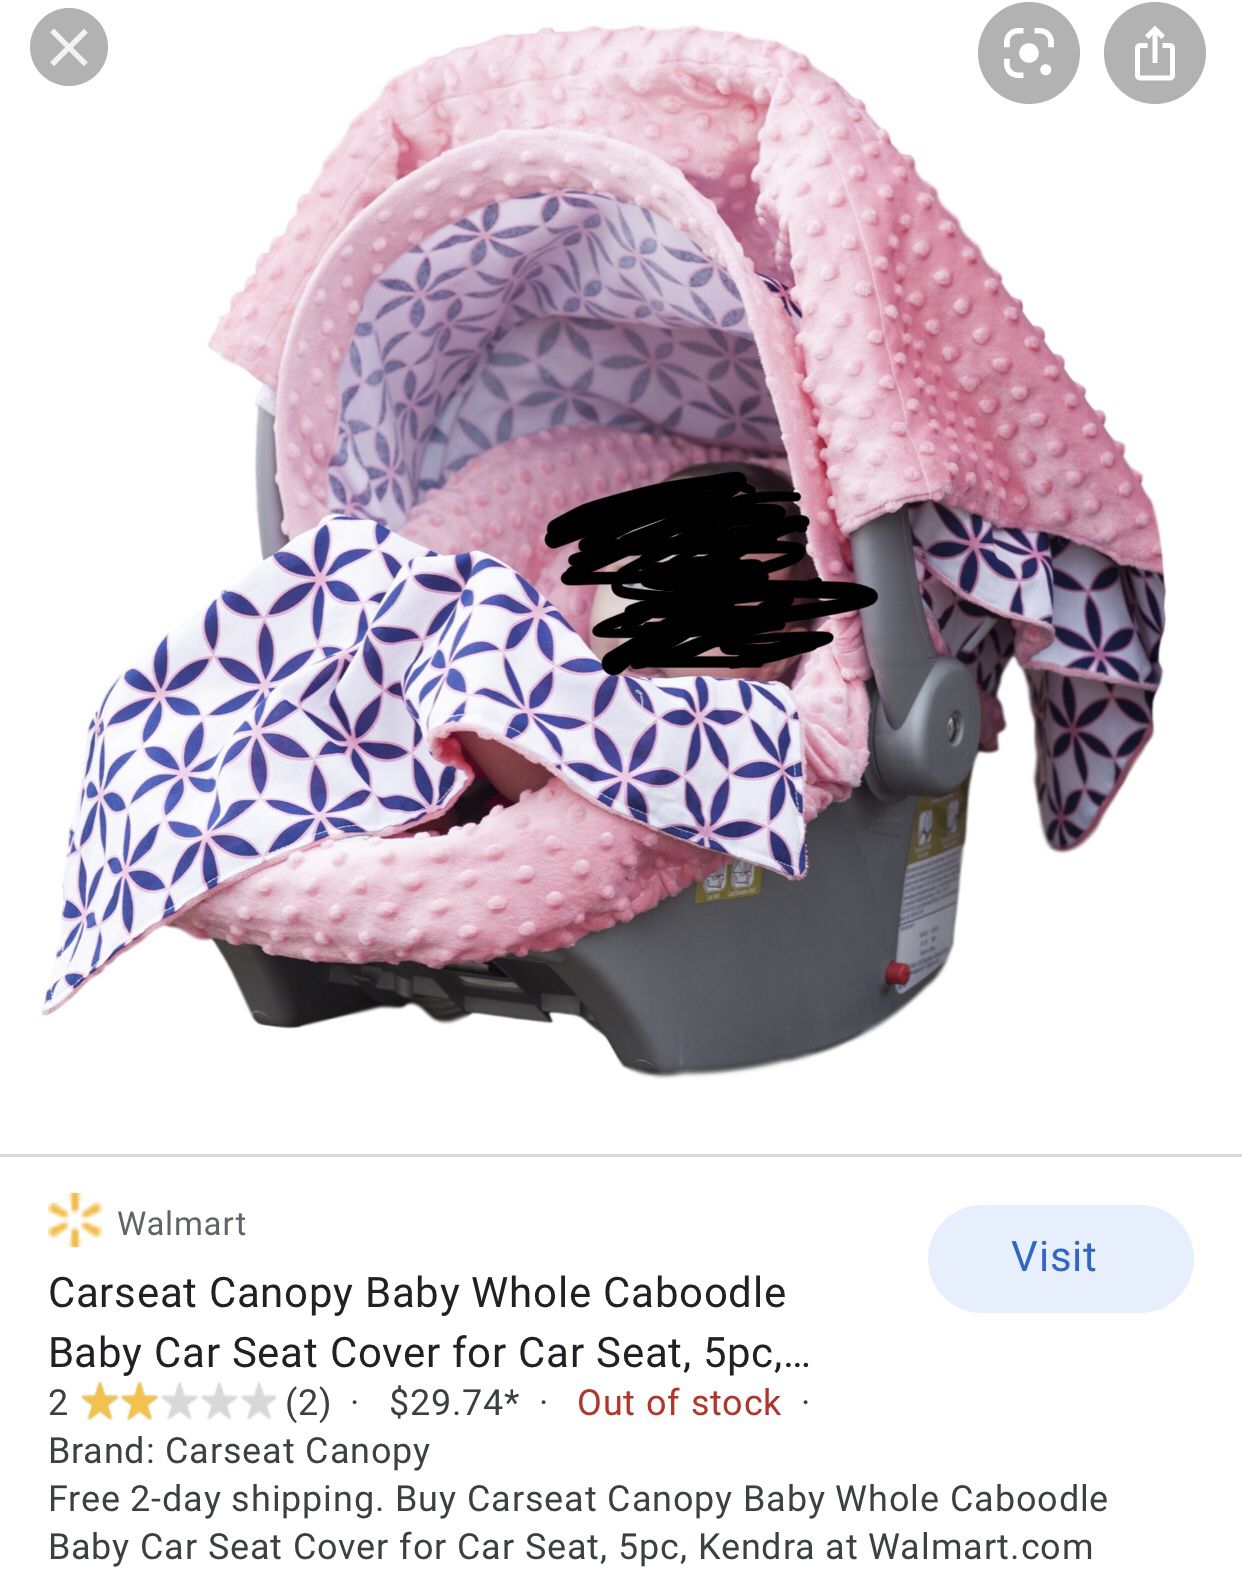 Whole baby care seat covers 5pc